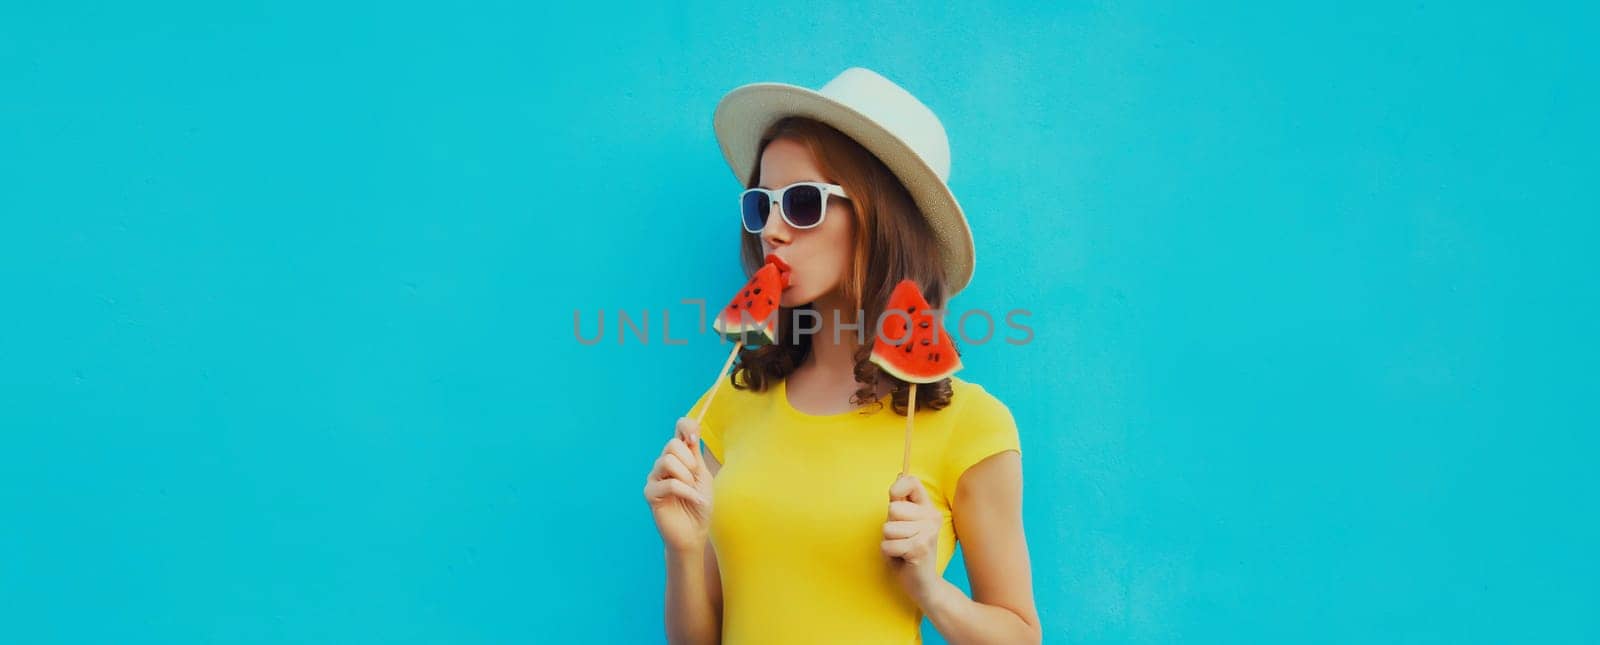 Summer portrait of stylish young woman with juicy lollipop or ice cream shaped slice of watermelon by Rohappy